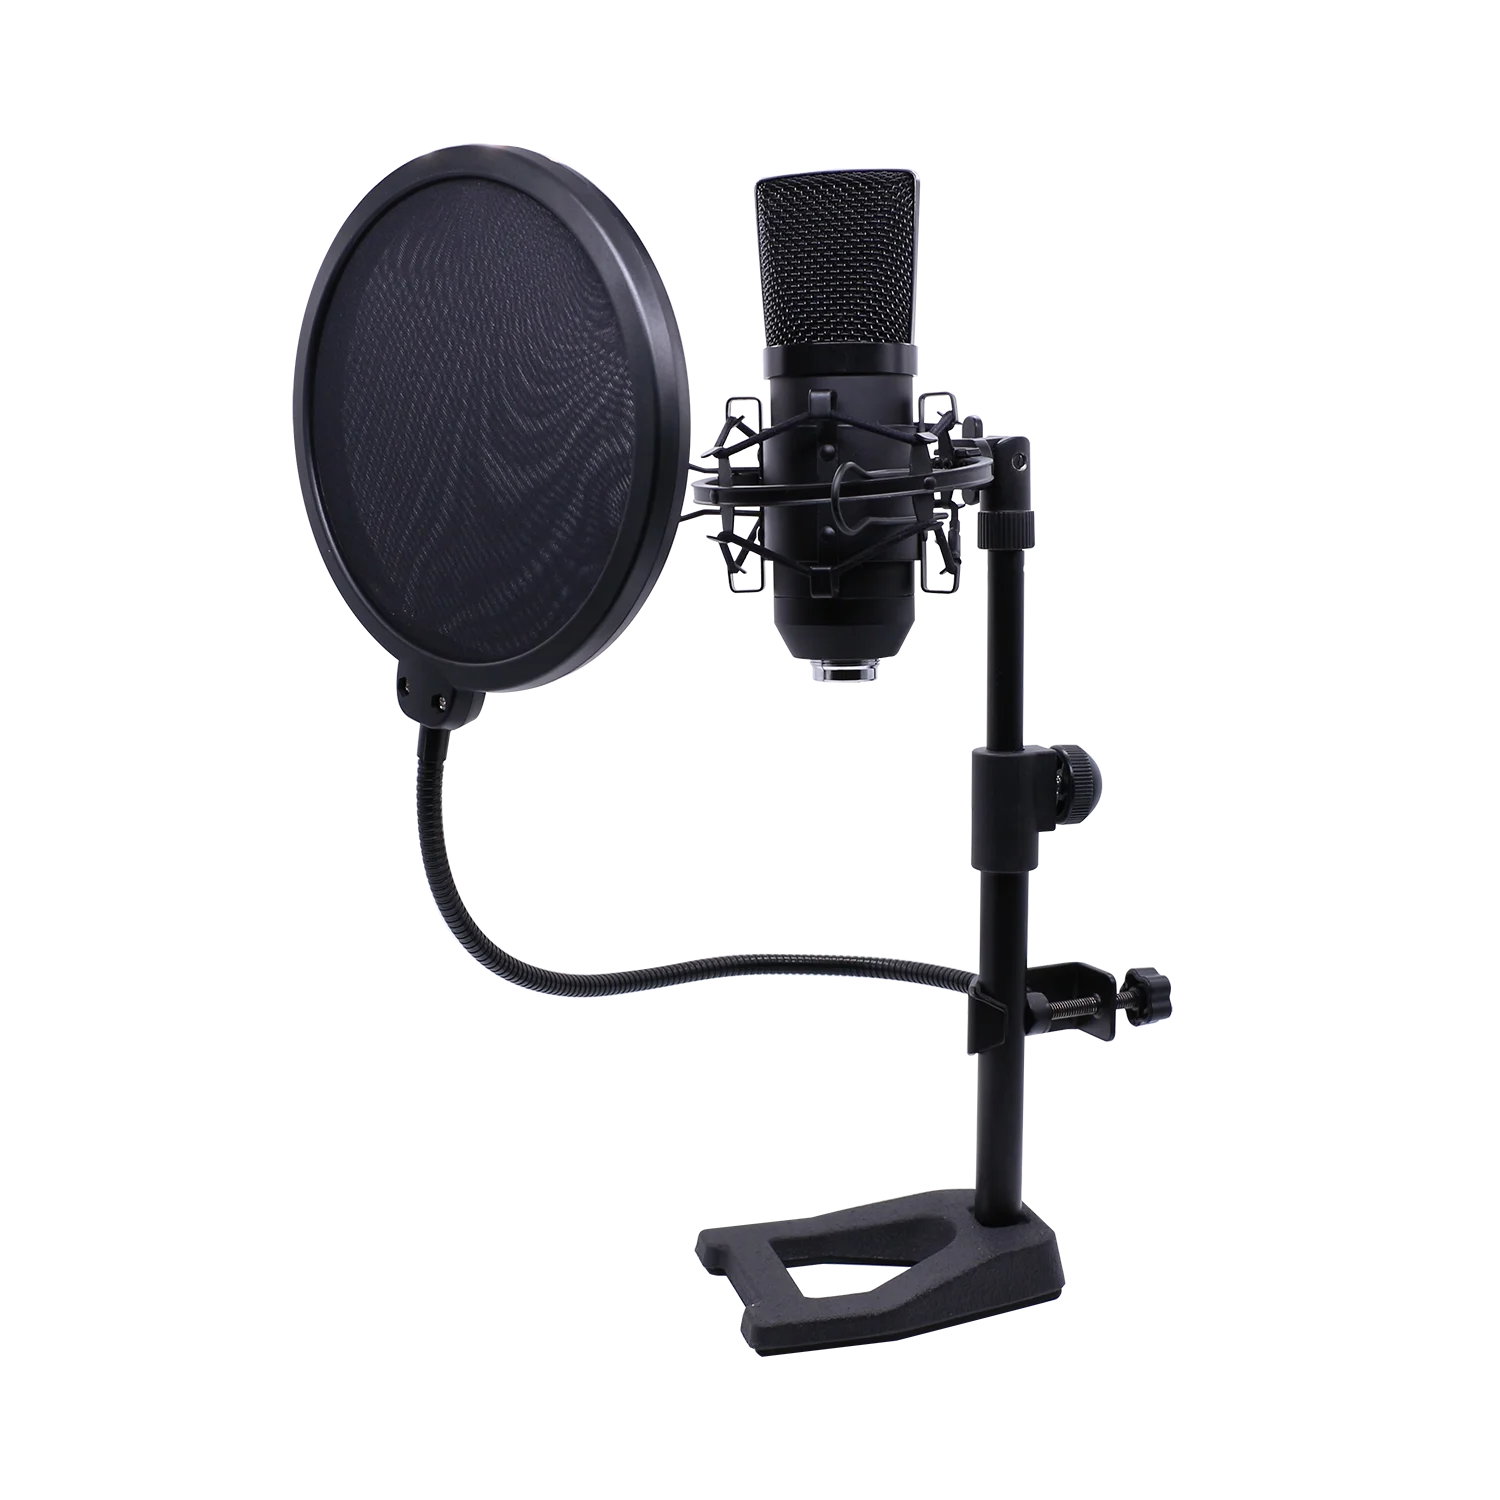 

Accuracy Pro Audio EM-700 Hot sale New Design Podcast Mic Plug & Play USB Condenser Microphone Stand Studio Set For Recording, Black